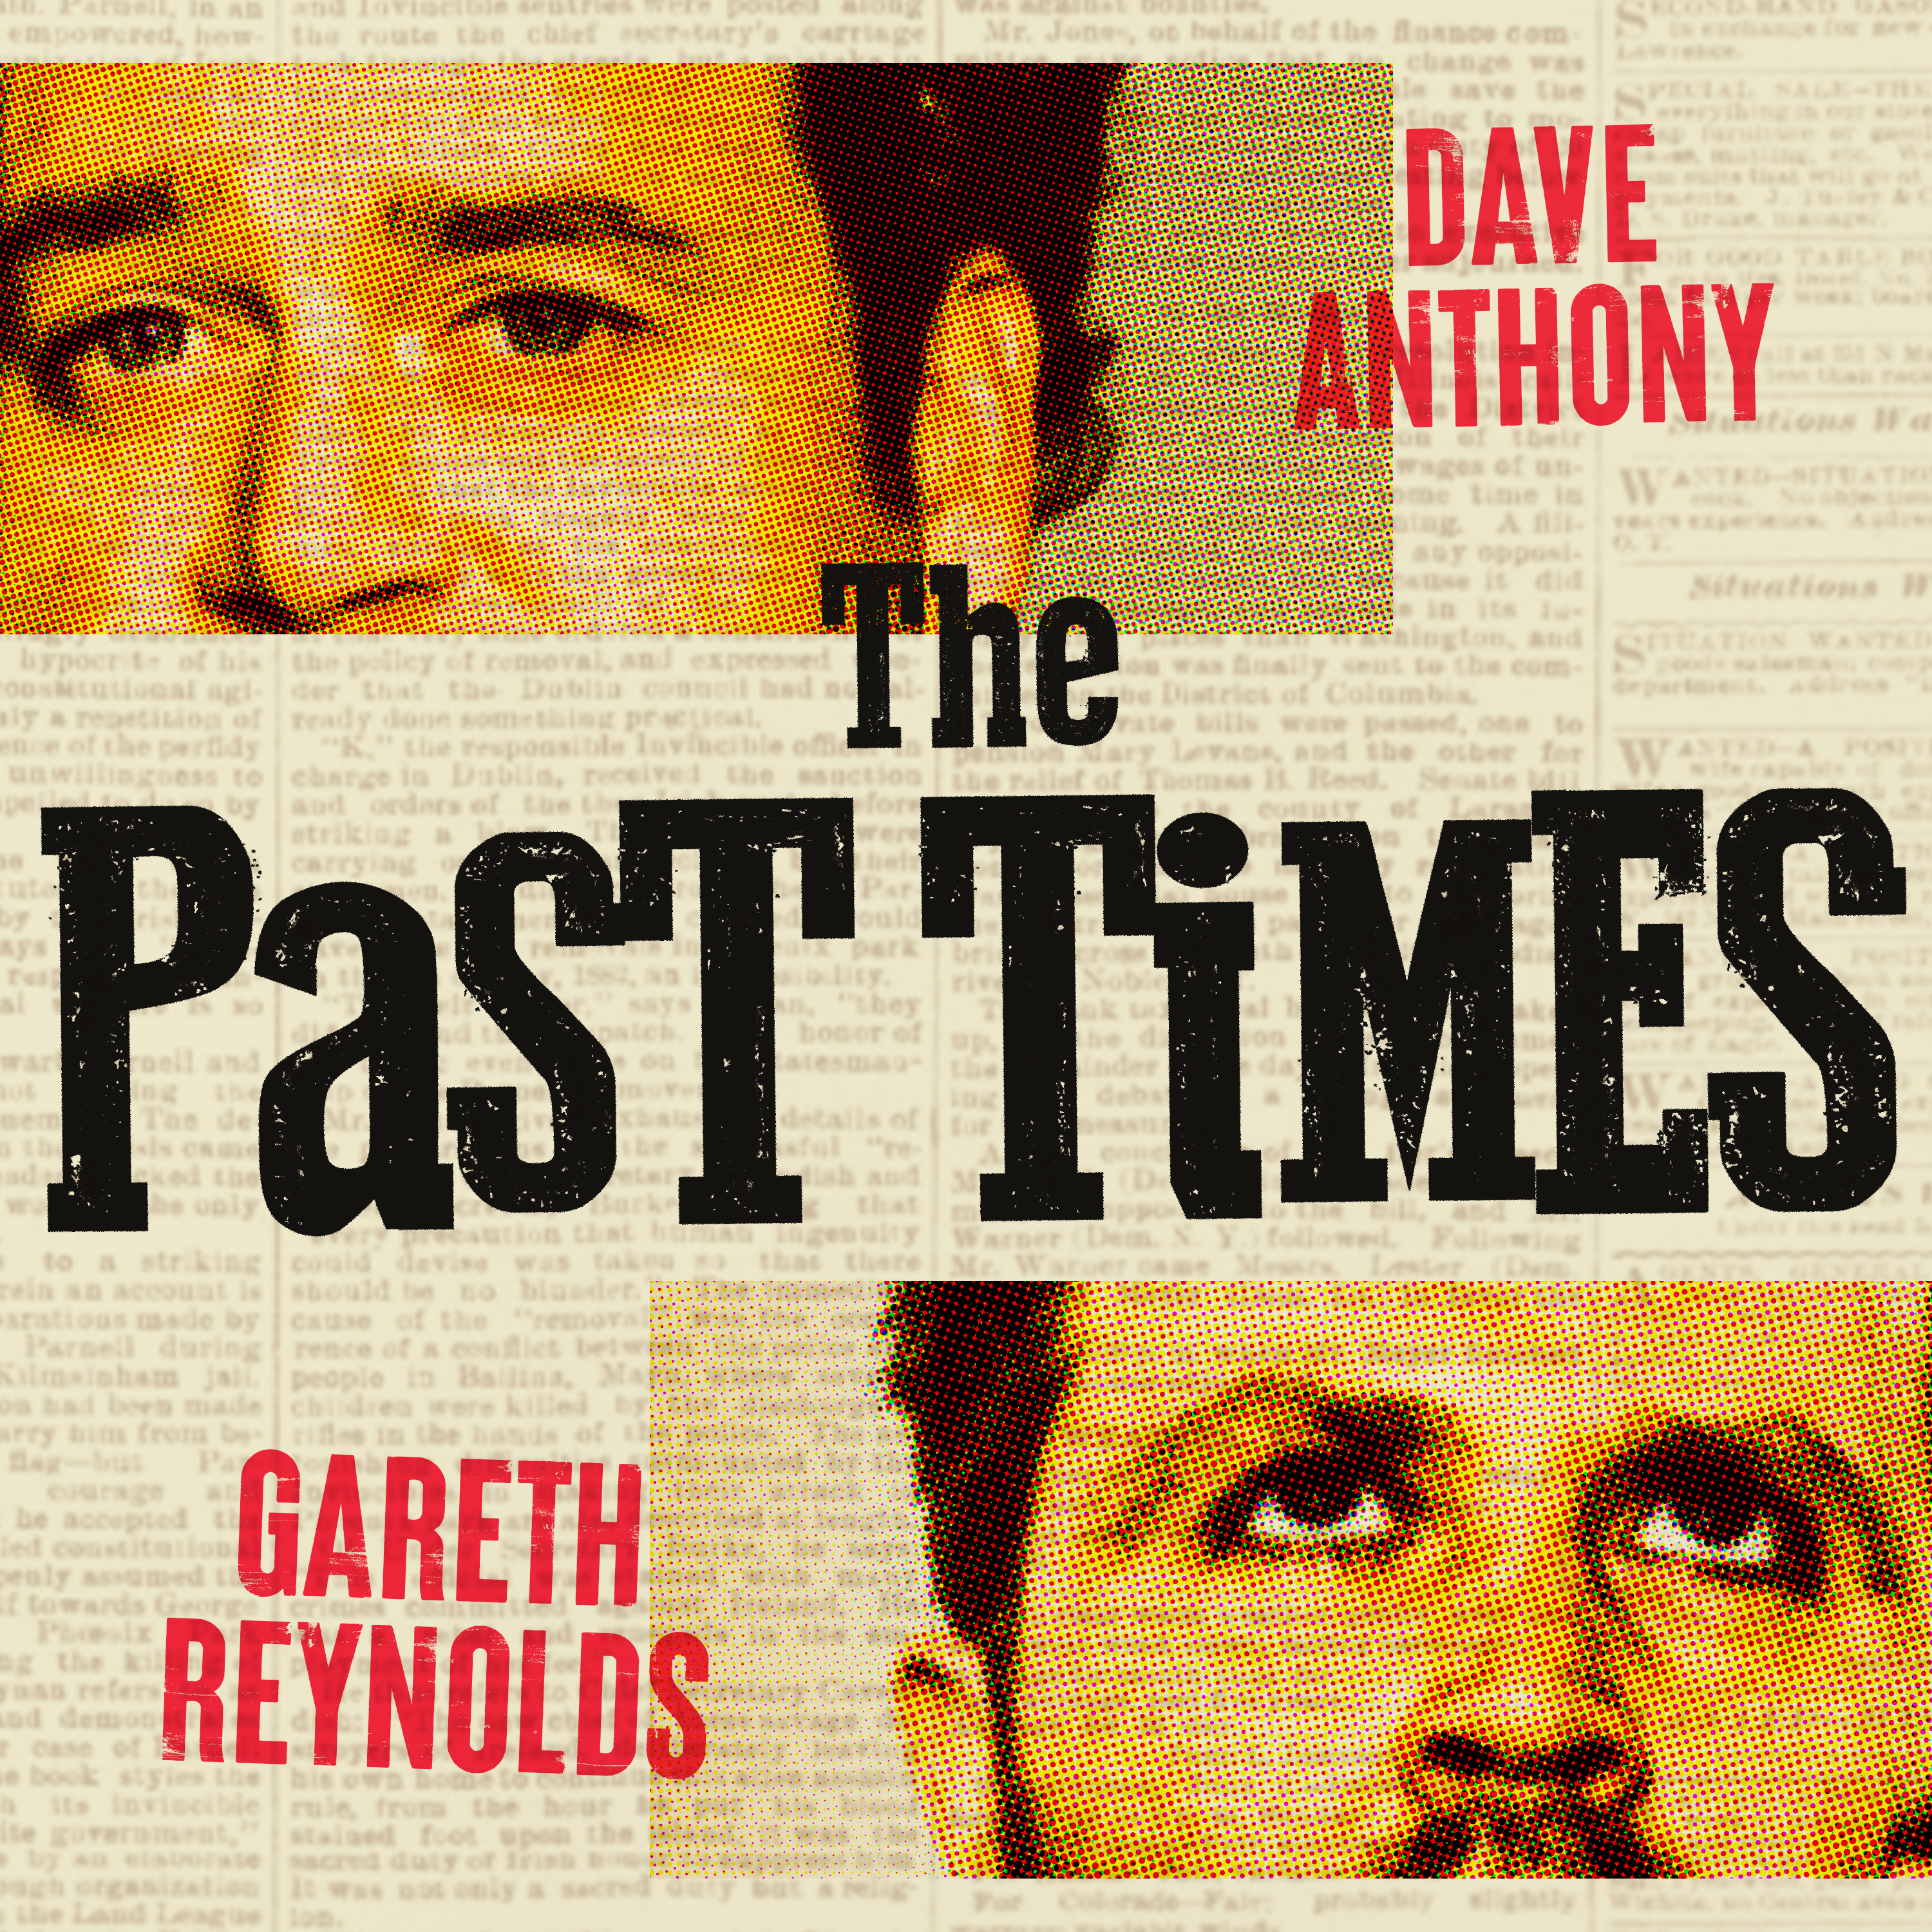 35 - The Past Times with David Helem